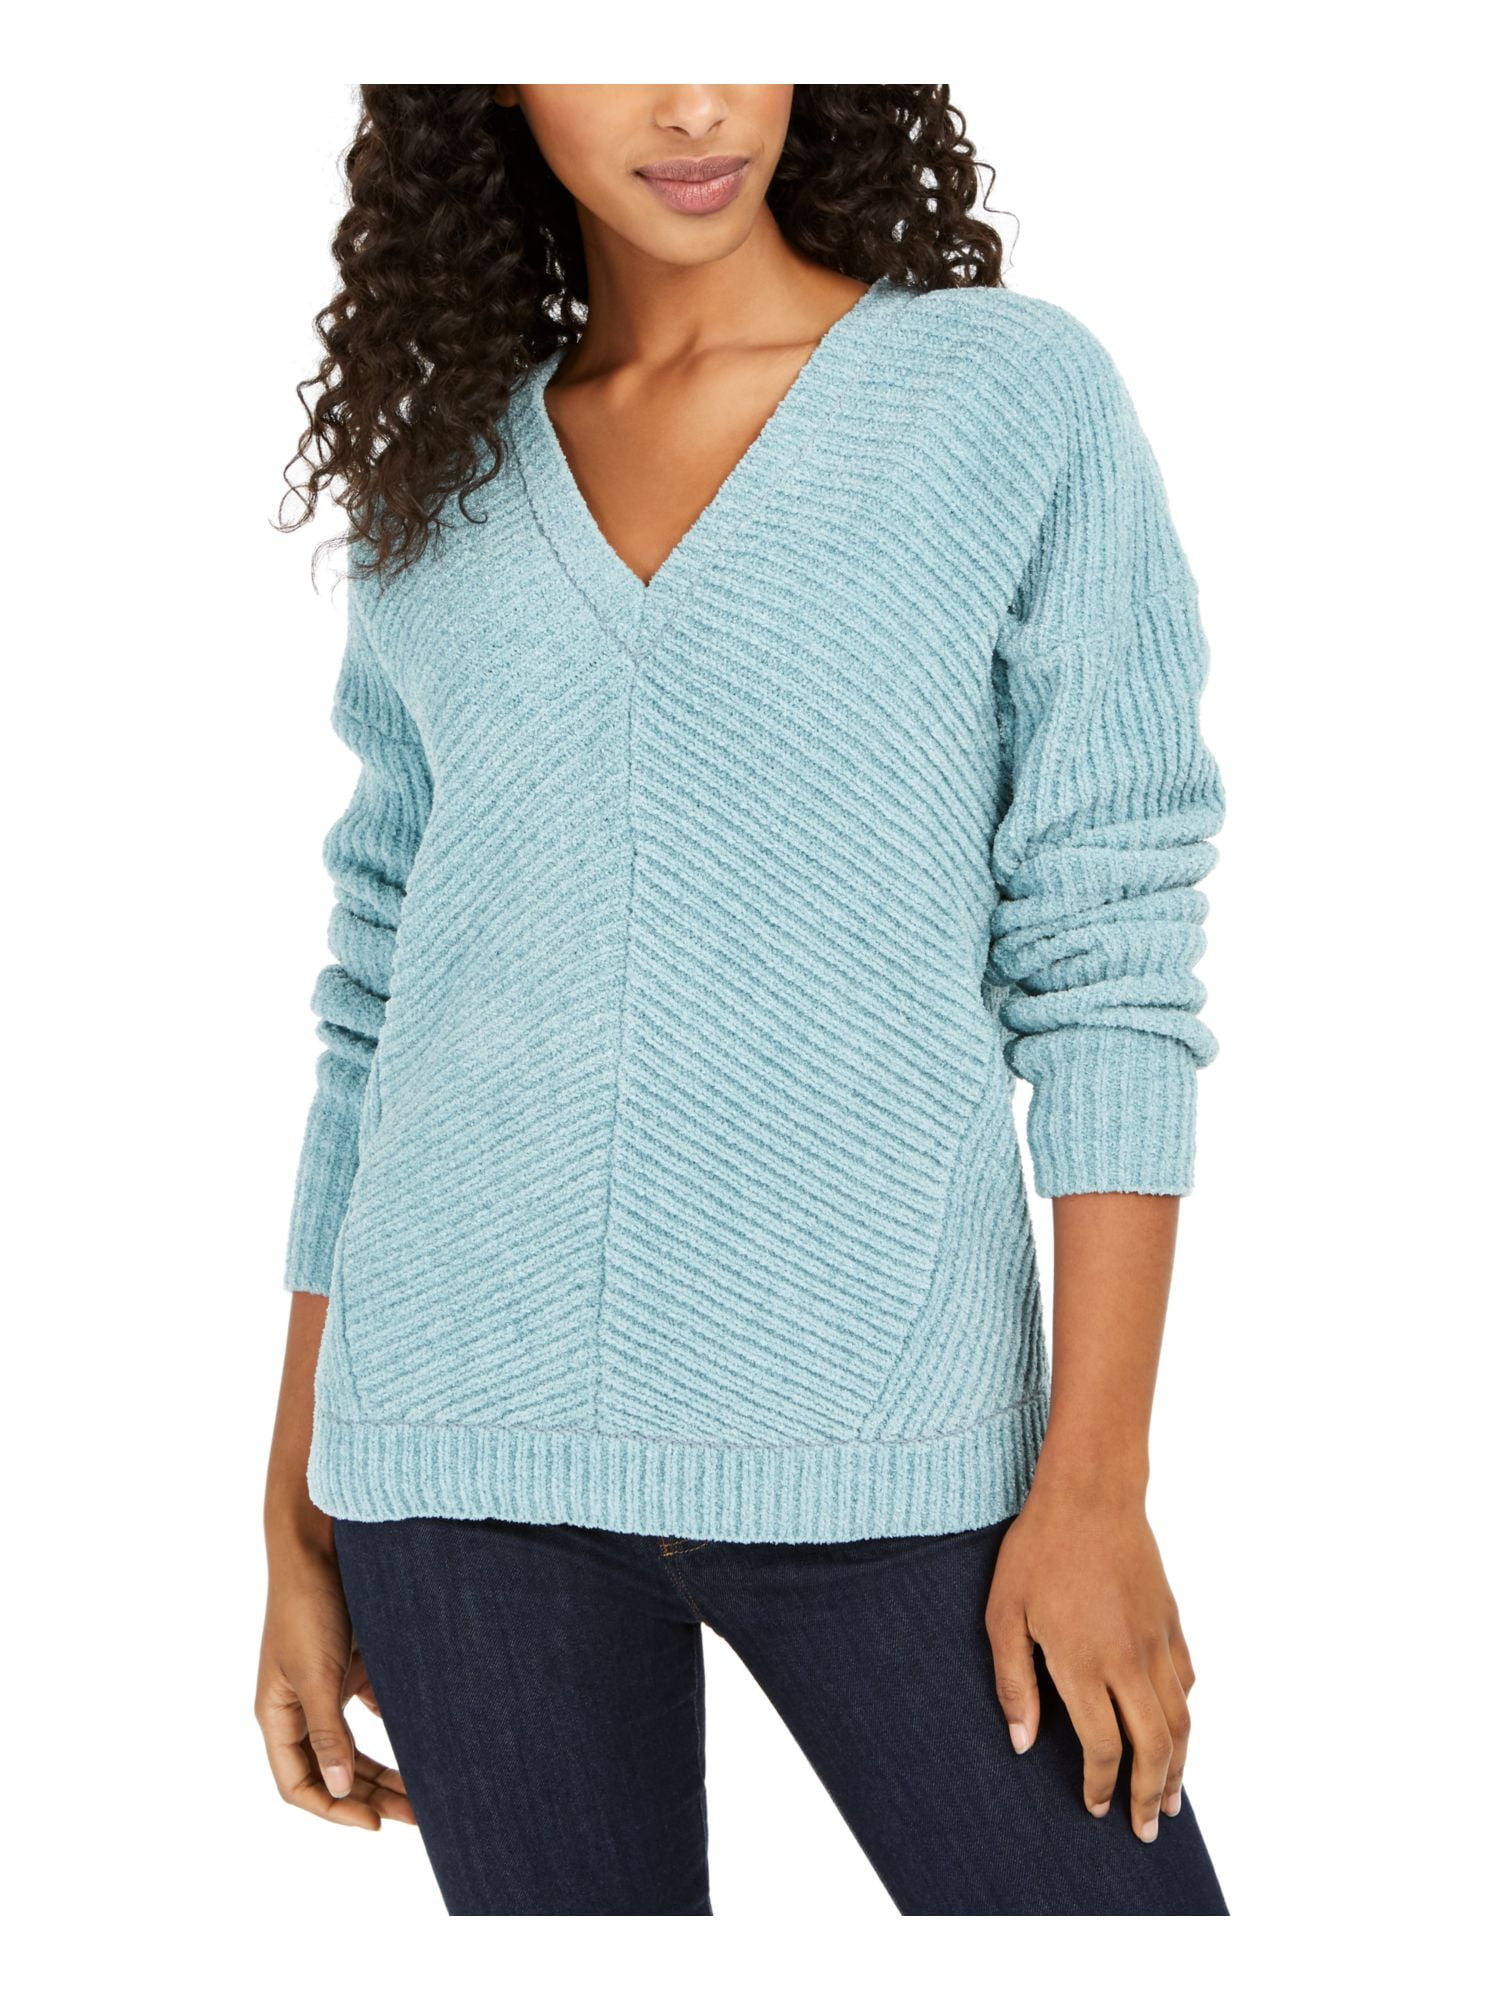 LUCKY BRAND Womens Teal Embroidered Long Sleeve V Neck Sweater